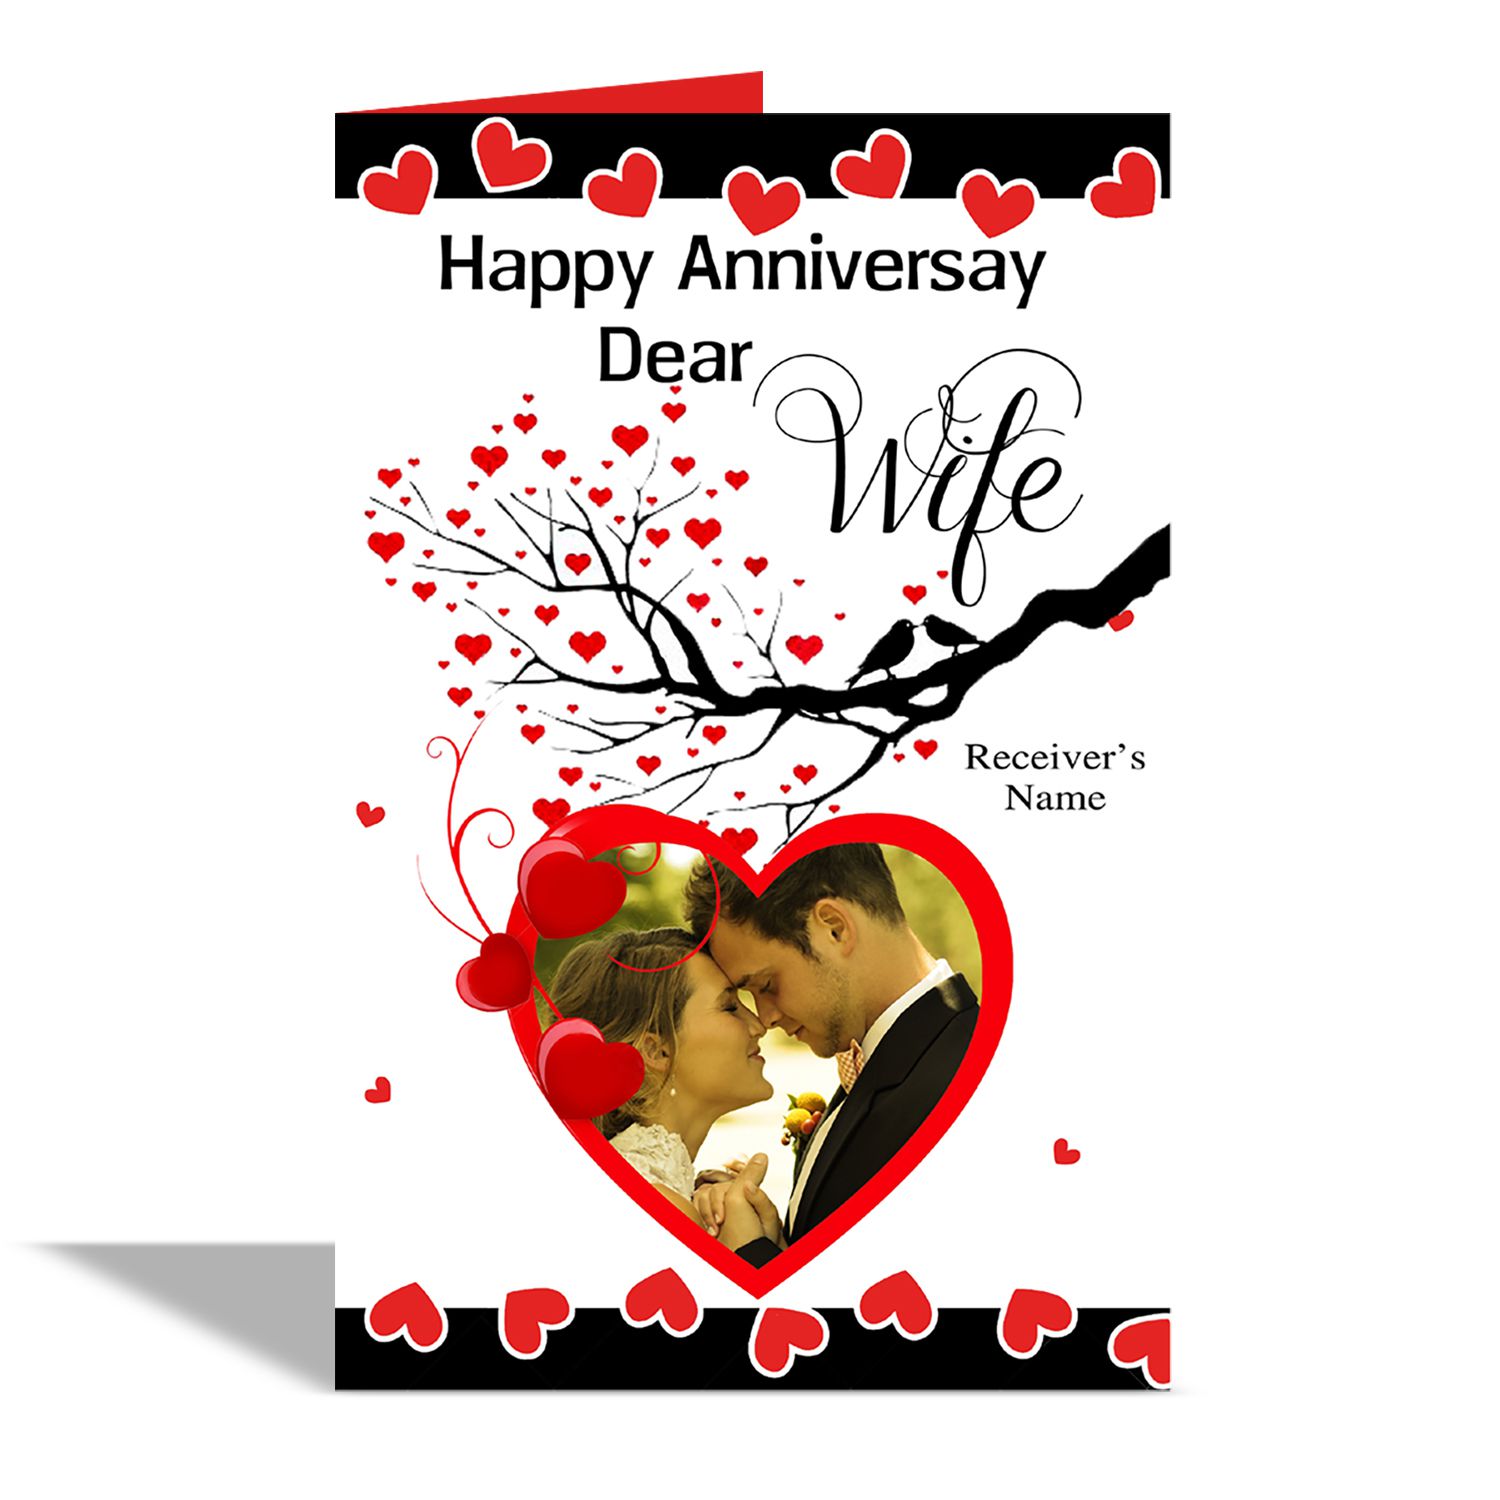 alwaysgift happy anniversary dear wife Greeting Card: Buy Online at